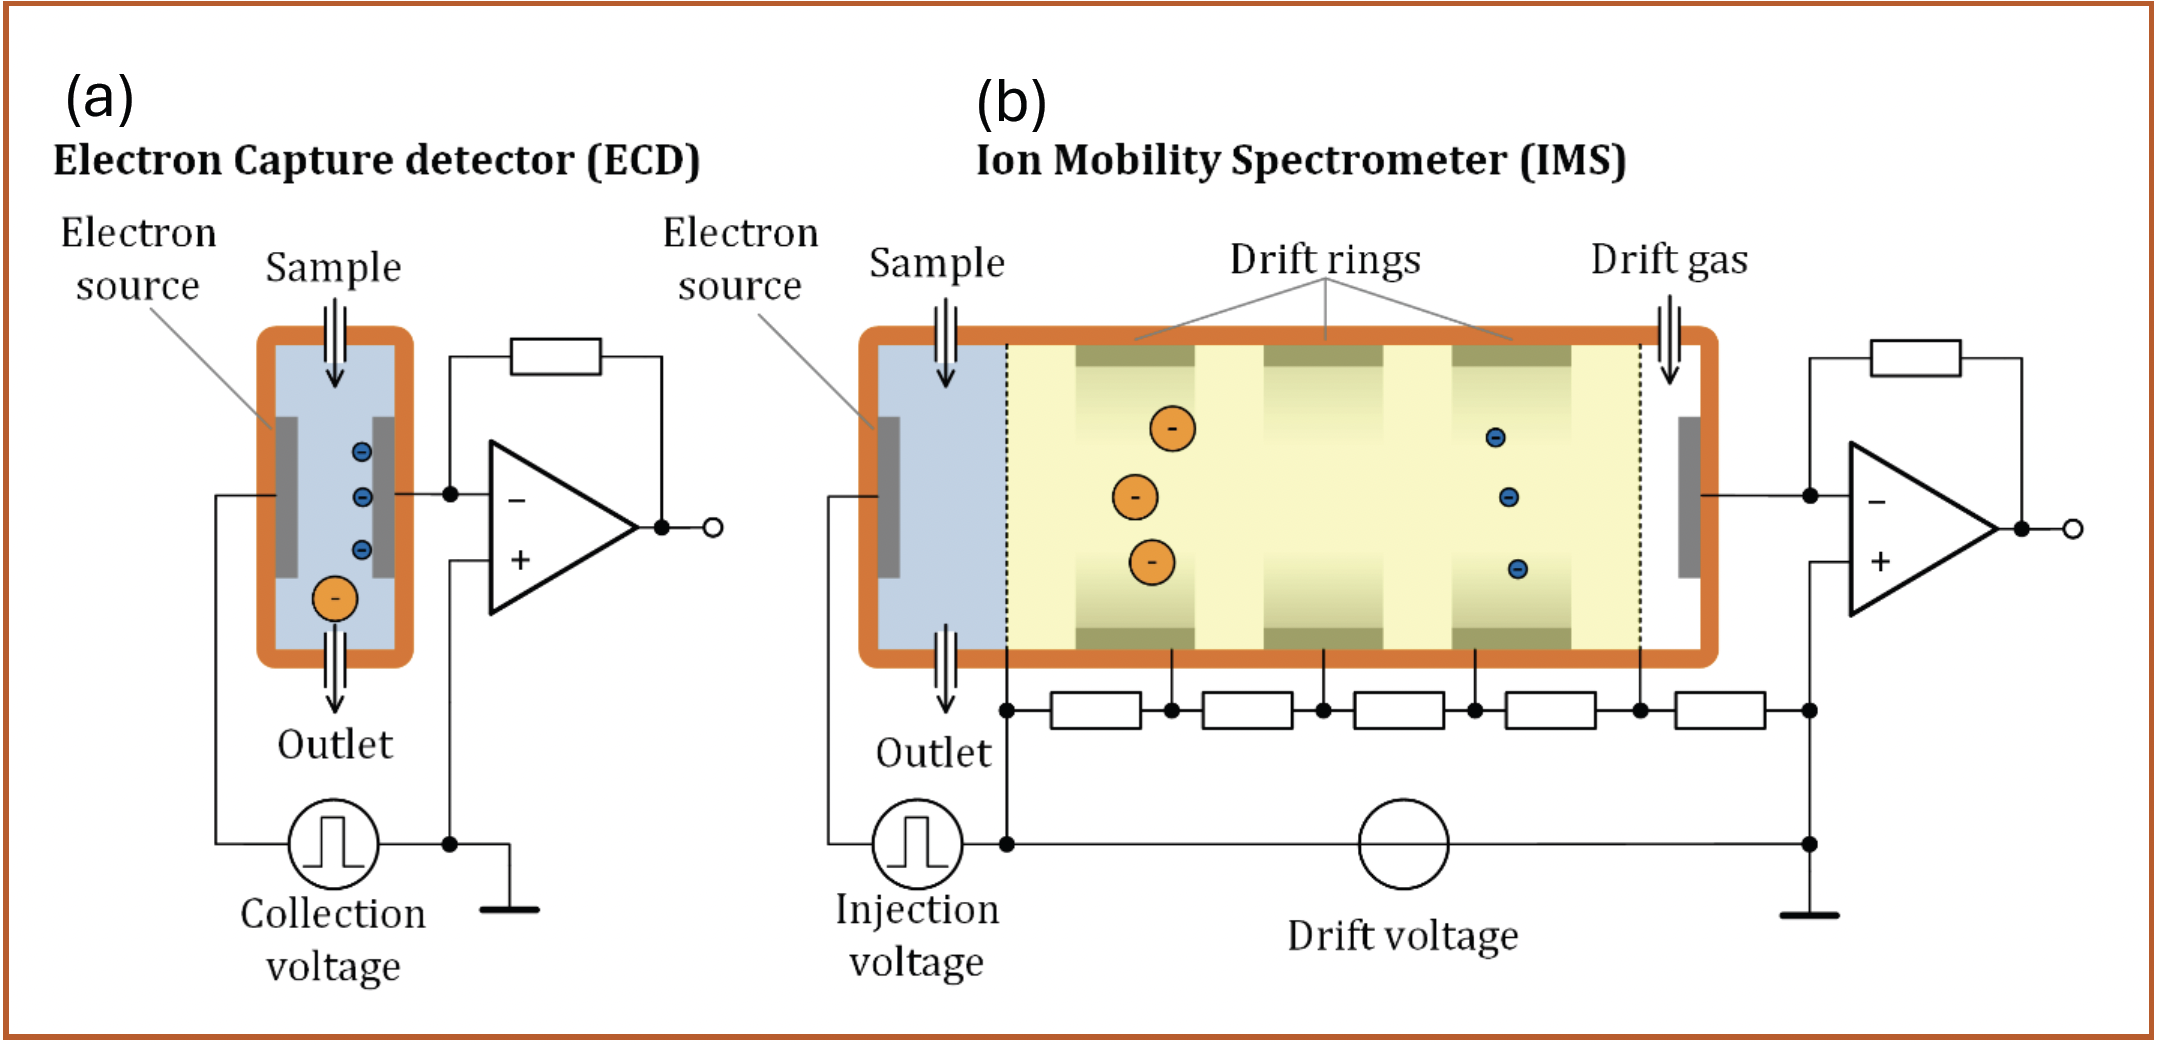 FIGURE 1: Comparison between the concepts of an electron capture detector (a) with parallel electrodes; and (b) a drift tube ion mobility spectrometer with a field-switching ion shutter. Note that neither design represents the most common variants in practice, but allow for an easily understandable comparison. See Figure 3 for a more detailed discussion of IMS design.